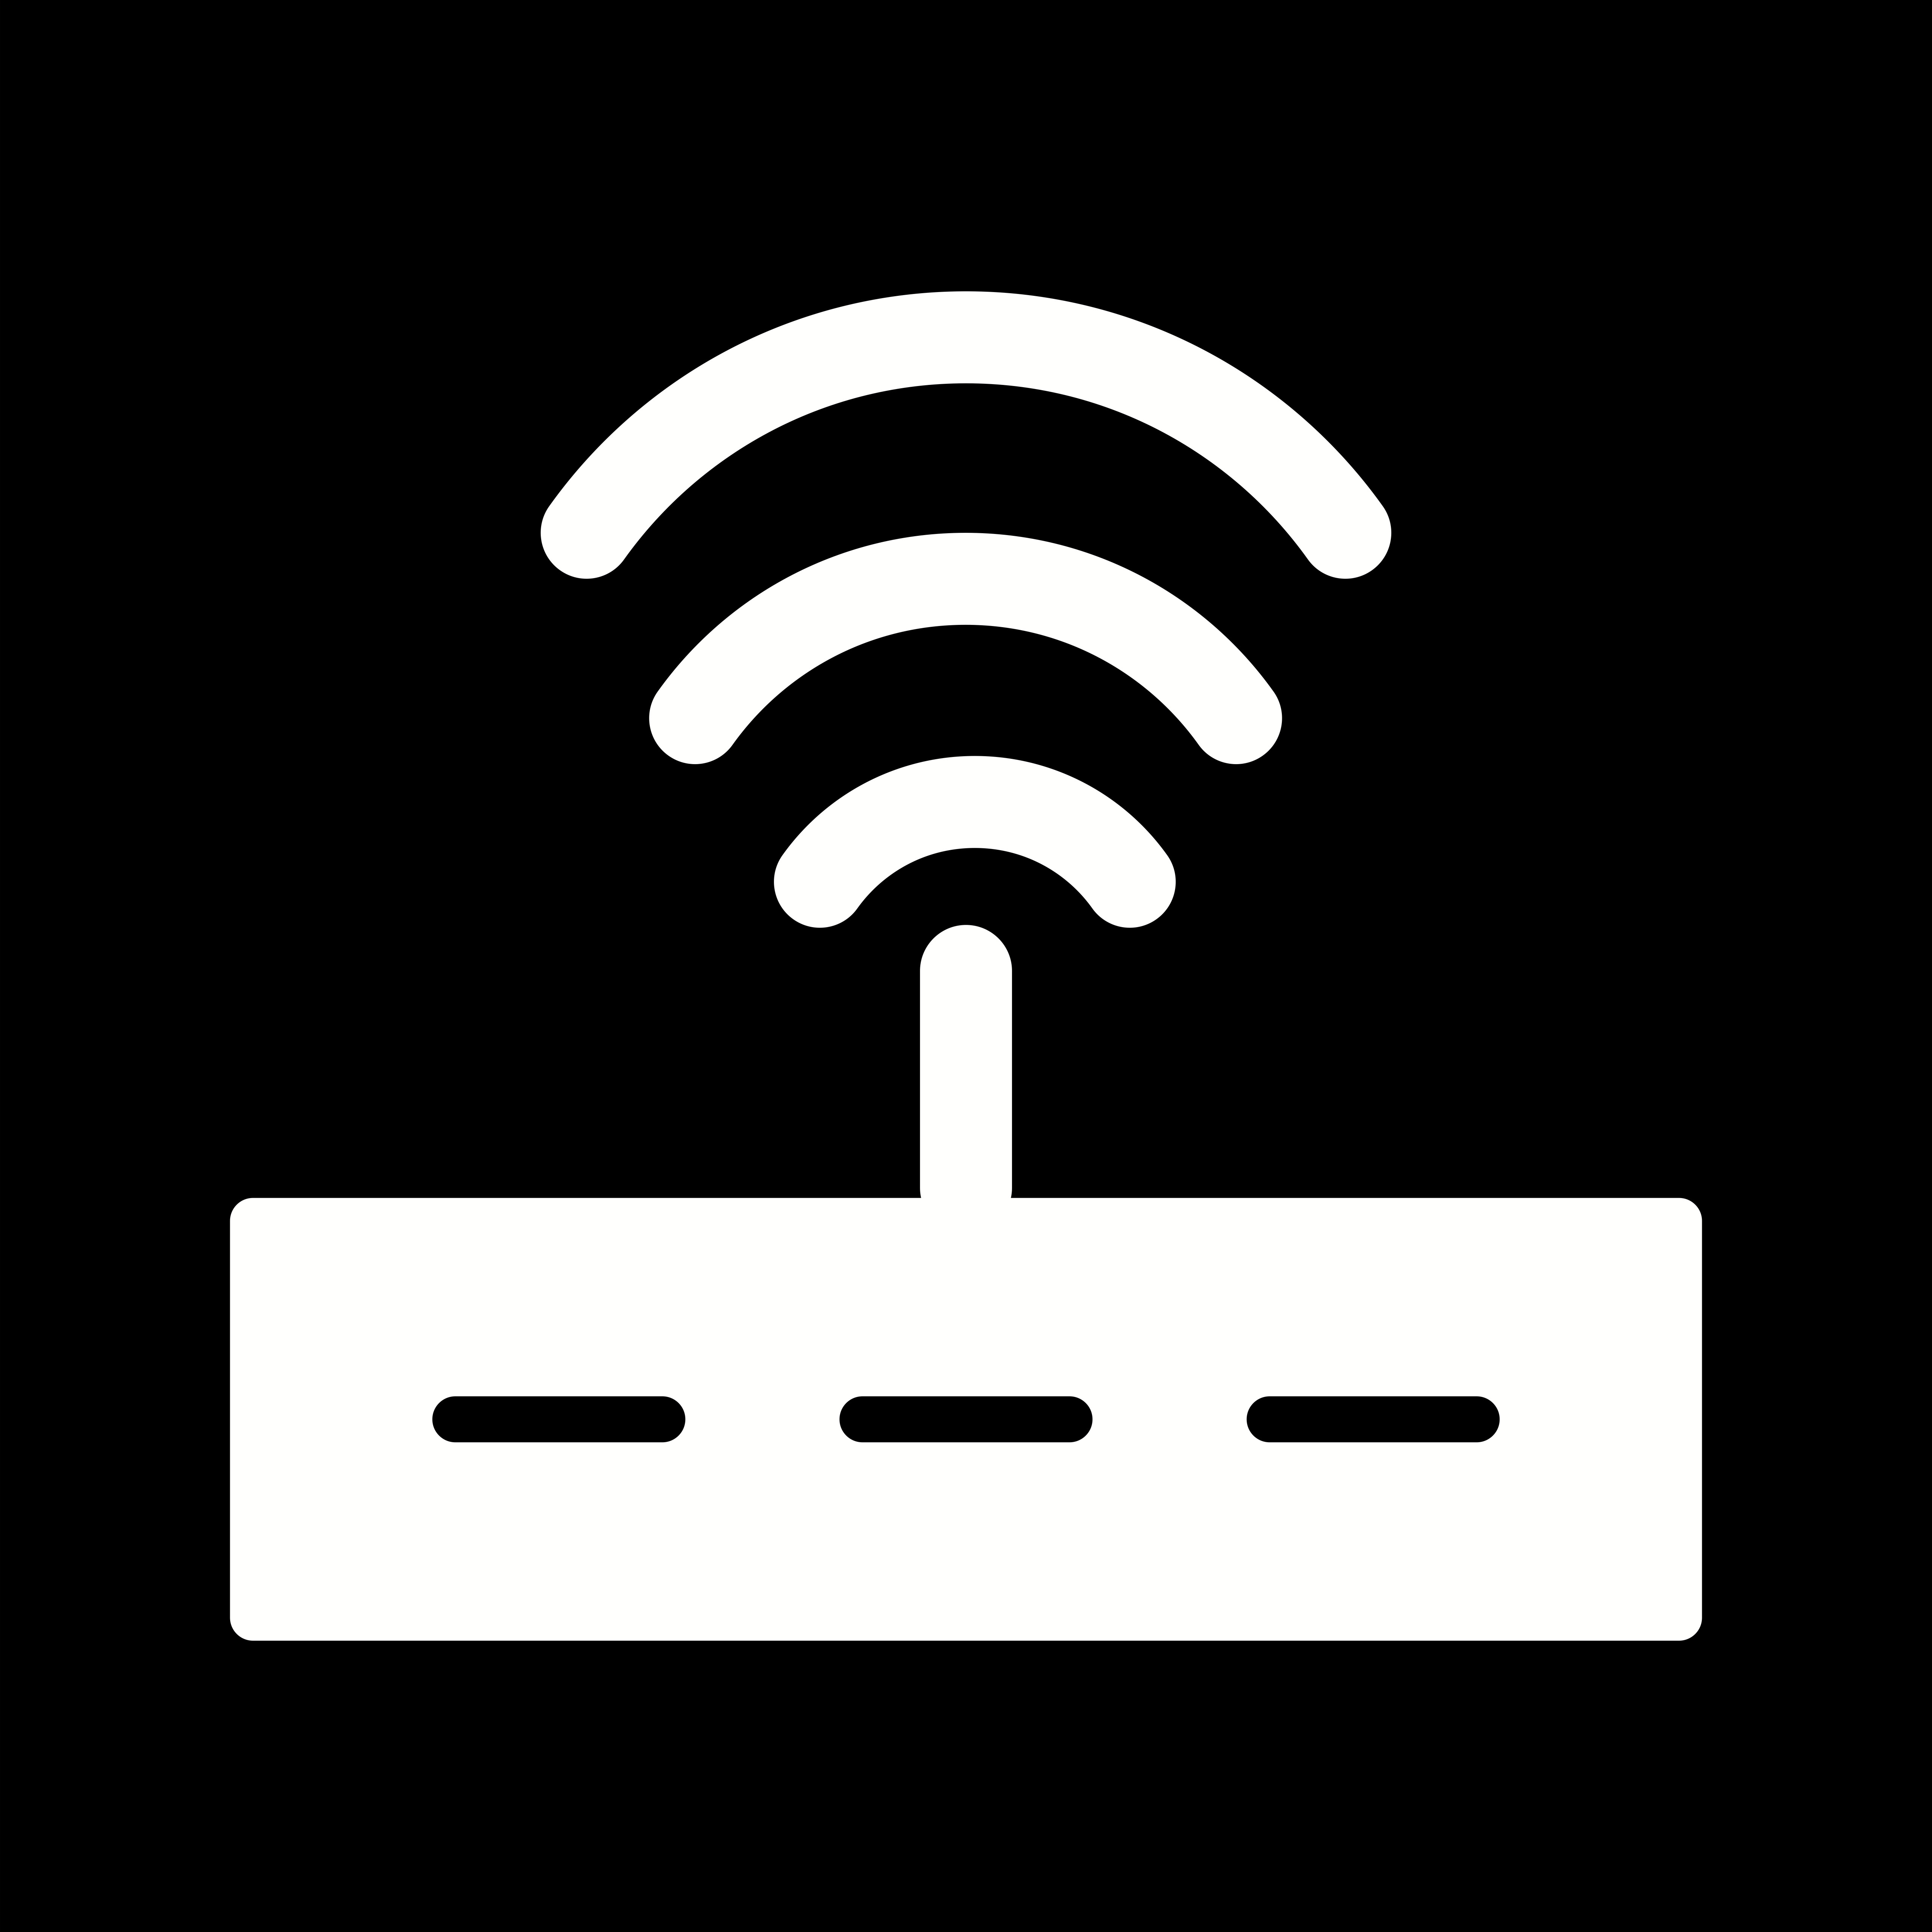 Download Vector Router Icon - Download Free Vectors, Clipart ...